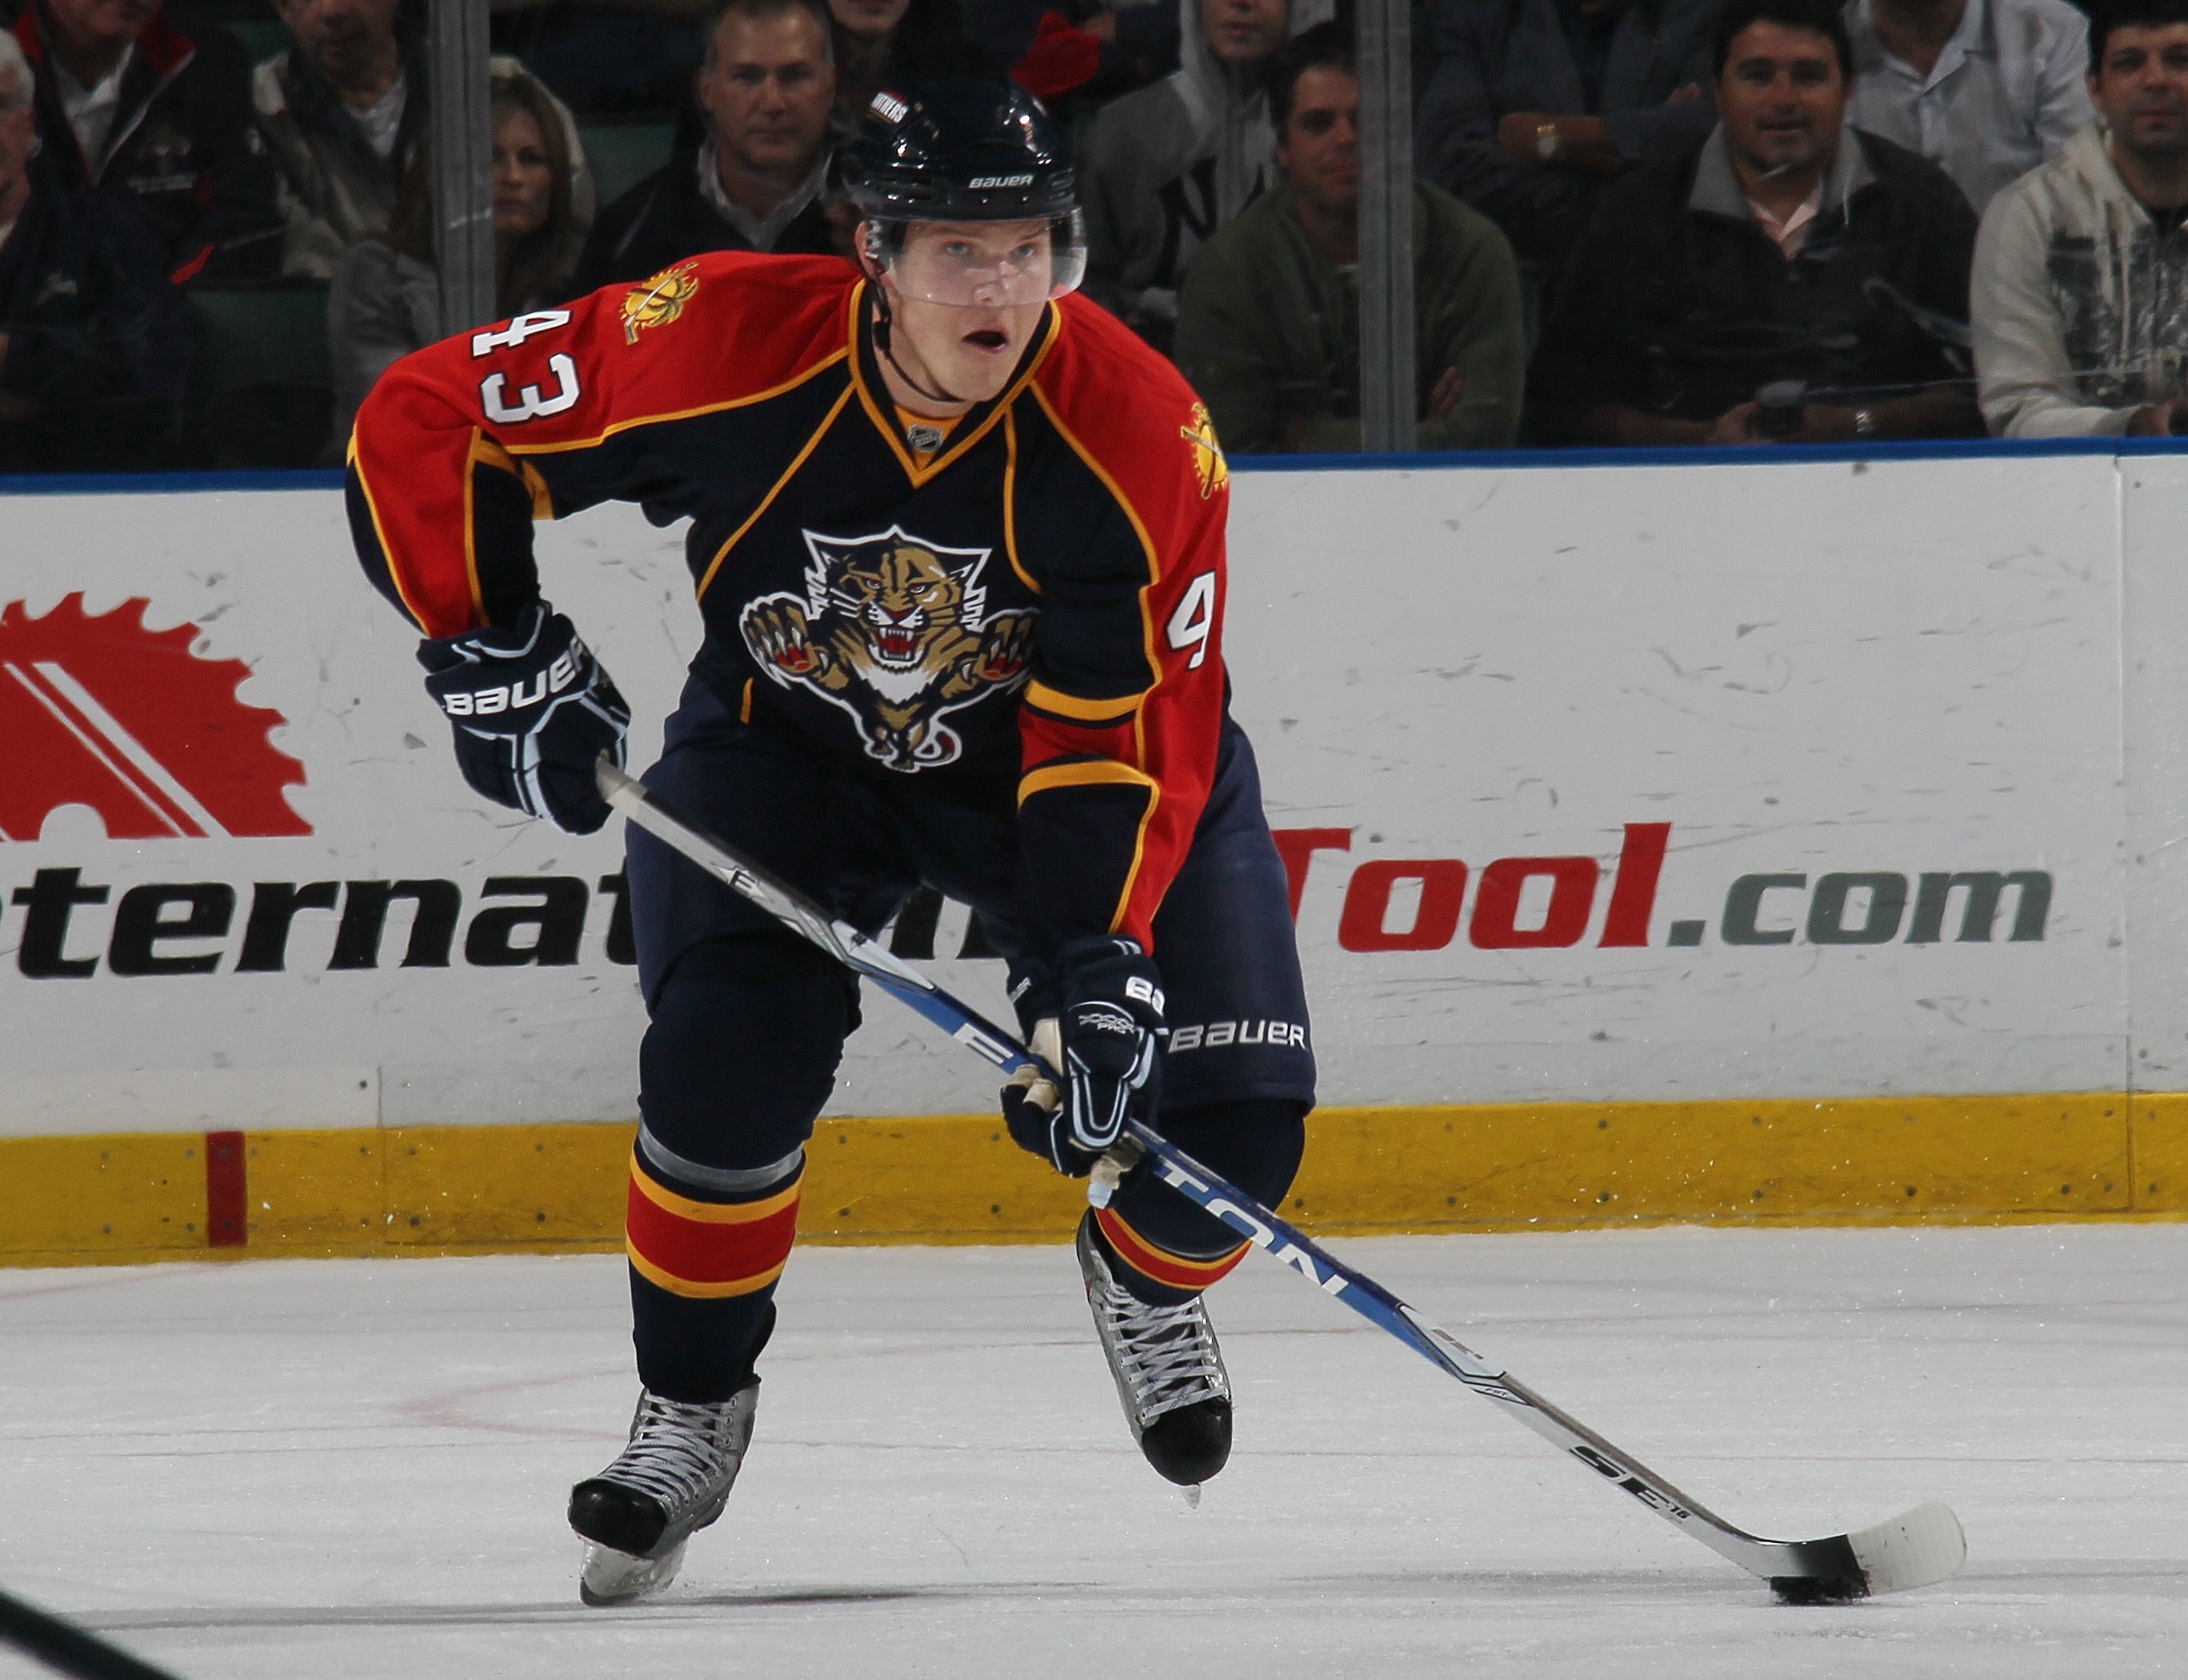 SUNRISE, FL - JANUARY 26: Dmitry Kulikov #43 of the Florida Panthers skates against the Montreal Canadiens at the BankAtlantic Center on January 26, 2010 in Sunrise, Florida.  (Photo by Bruce Bennett/Getty Images)